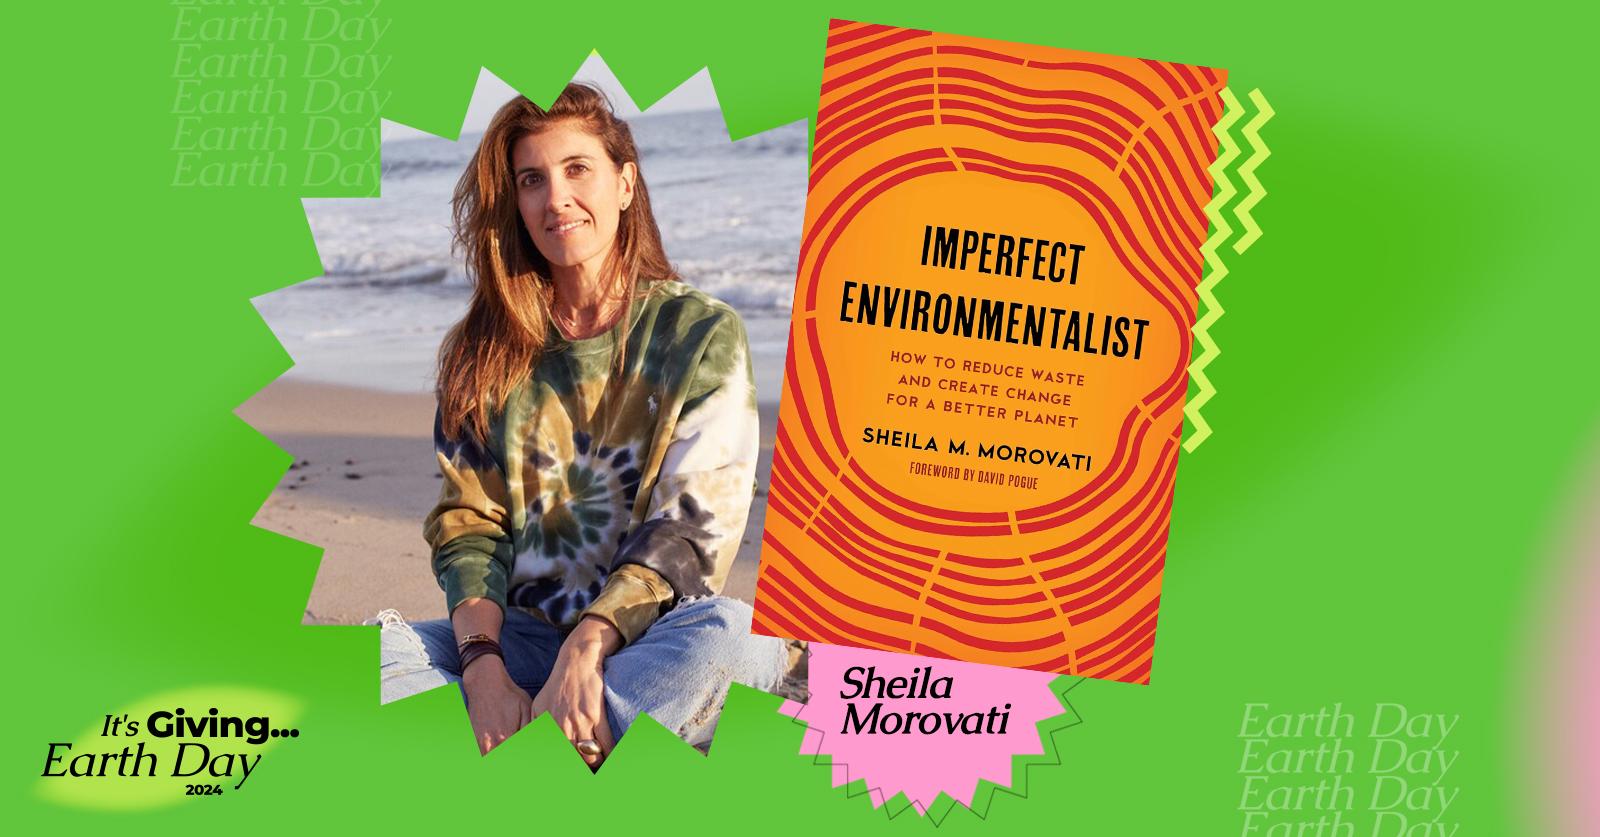 Collage on a green background with a photo of Sheila M. Morovati sitting on a beach, and the cover of her book 'Imperfect Environmentalist.'